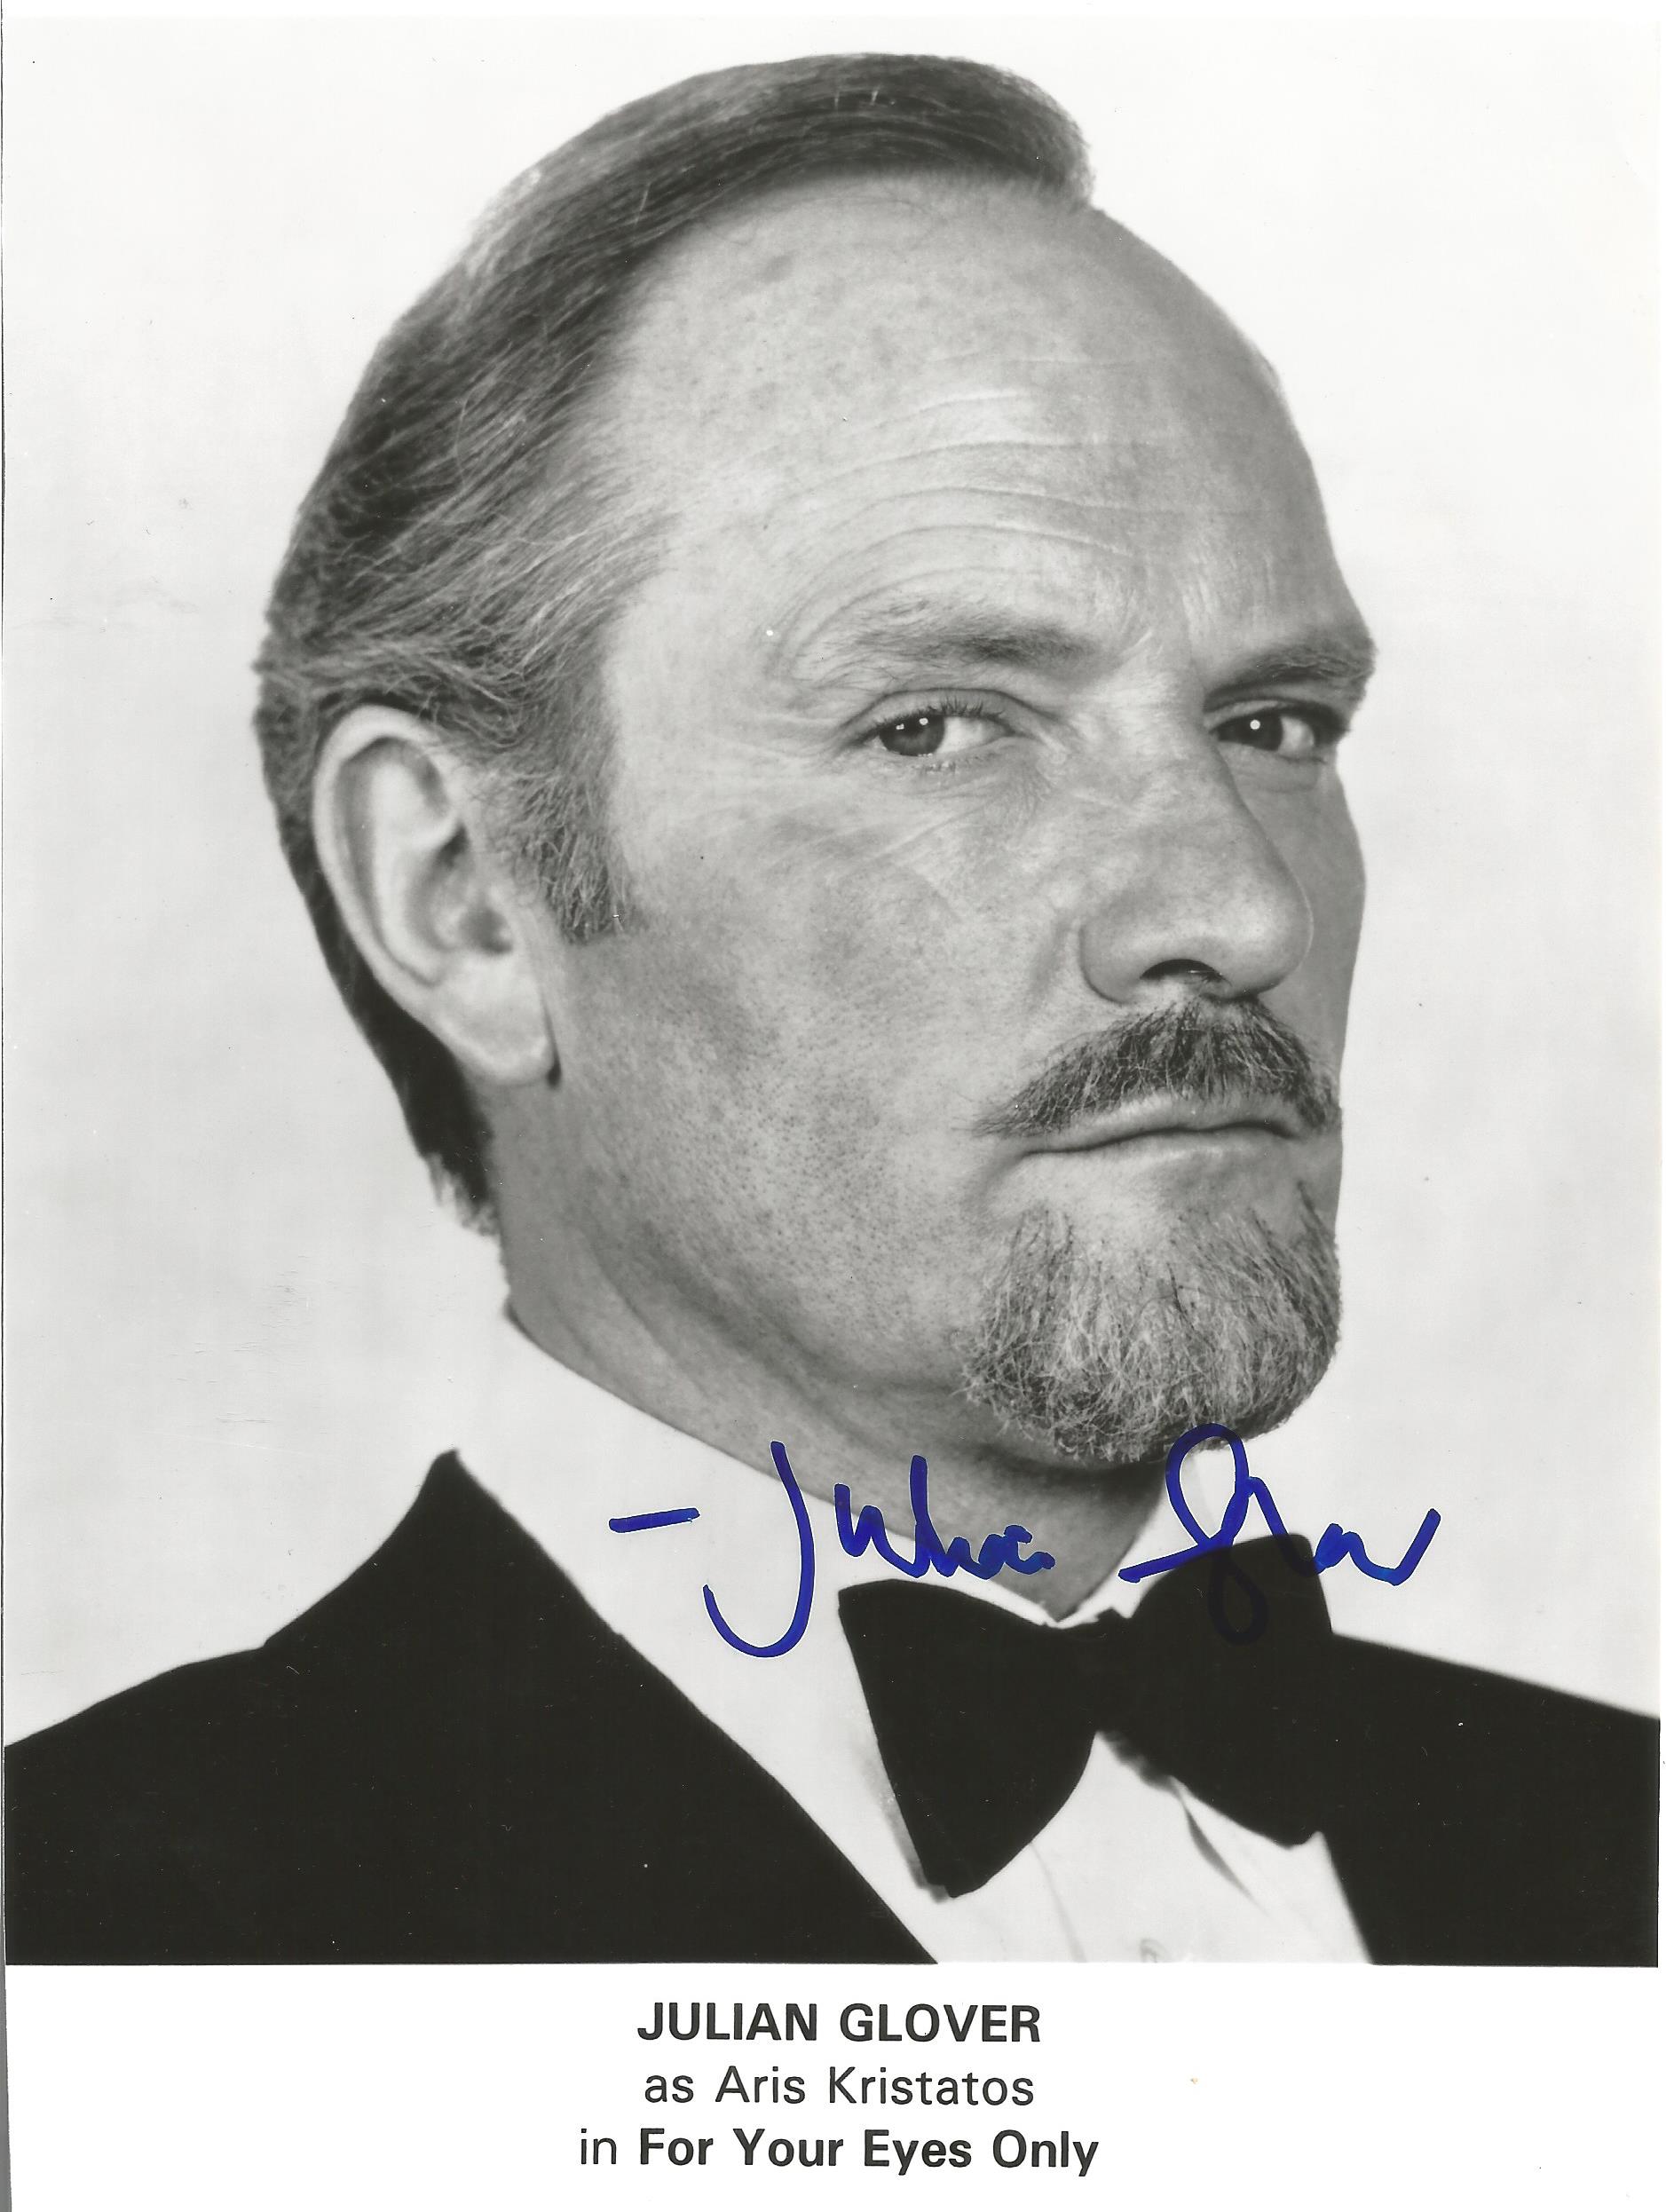 Julian Glover signed 8x6 black and white photo pictured as Aris Kristatos from For Your Eyes Only.